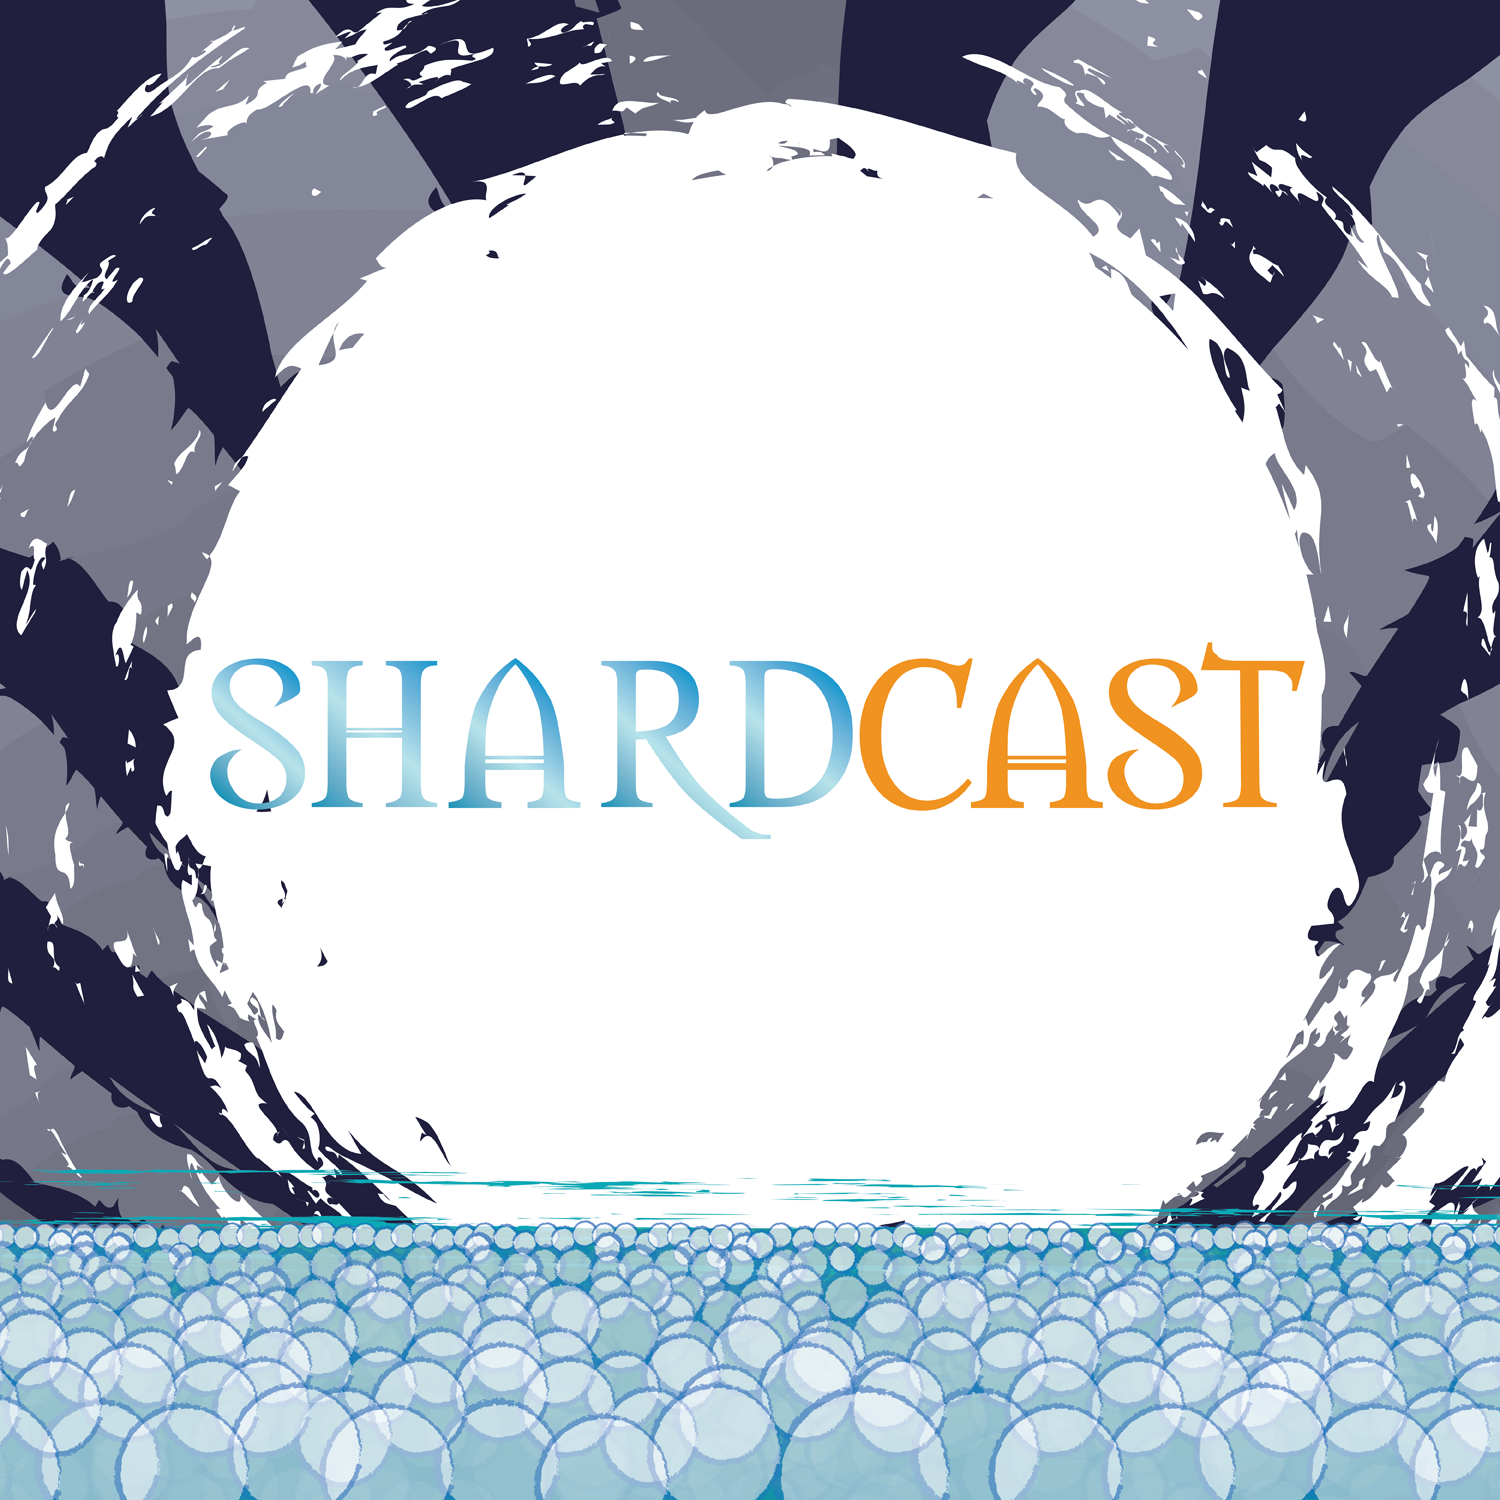 More information about "Shardcast: State of the Sanderson 2020"